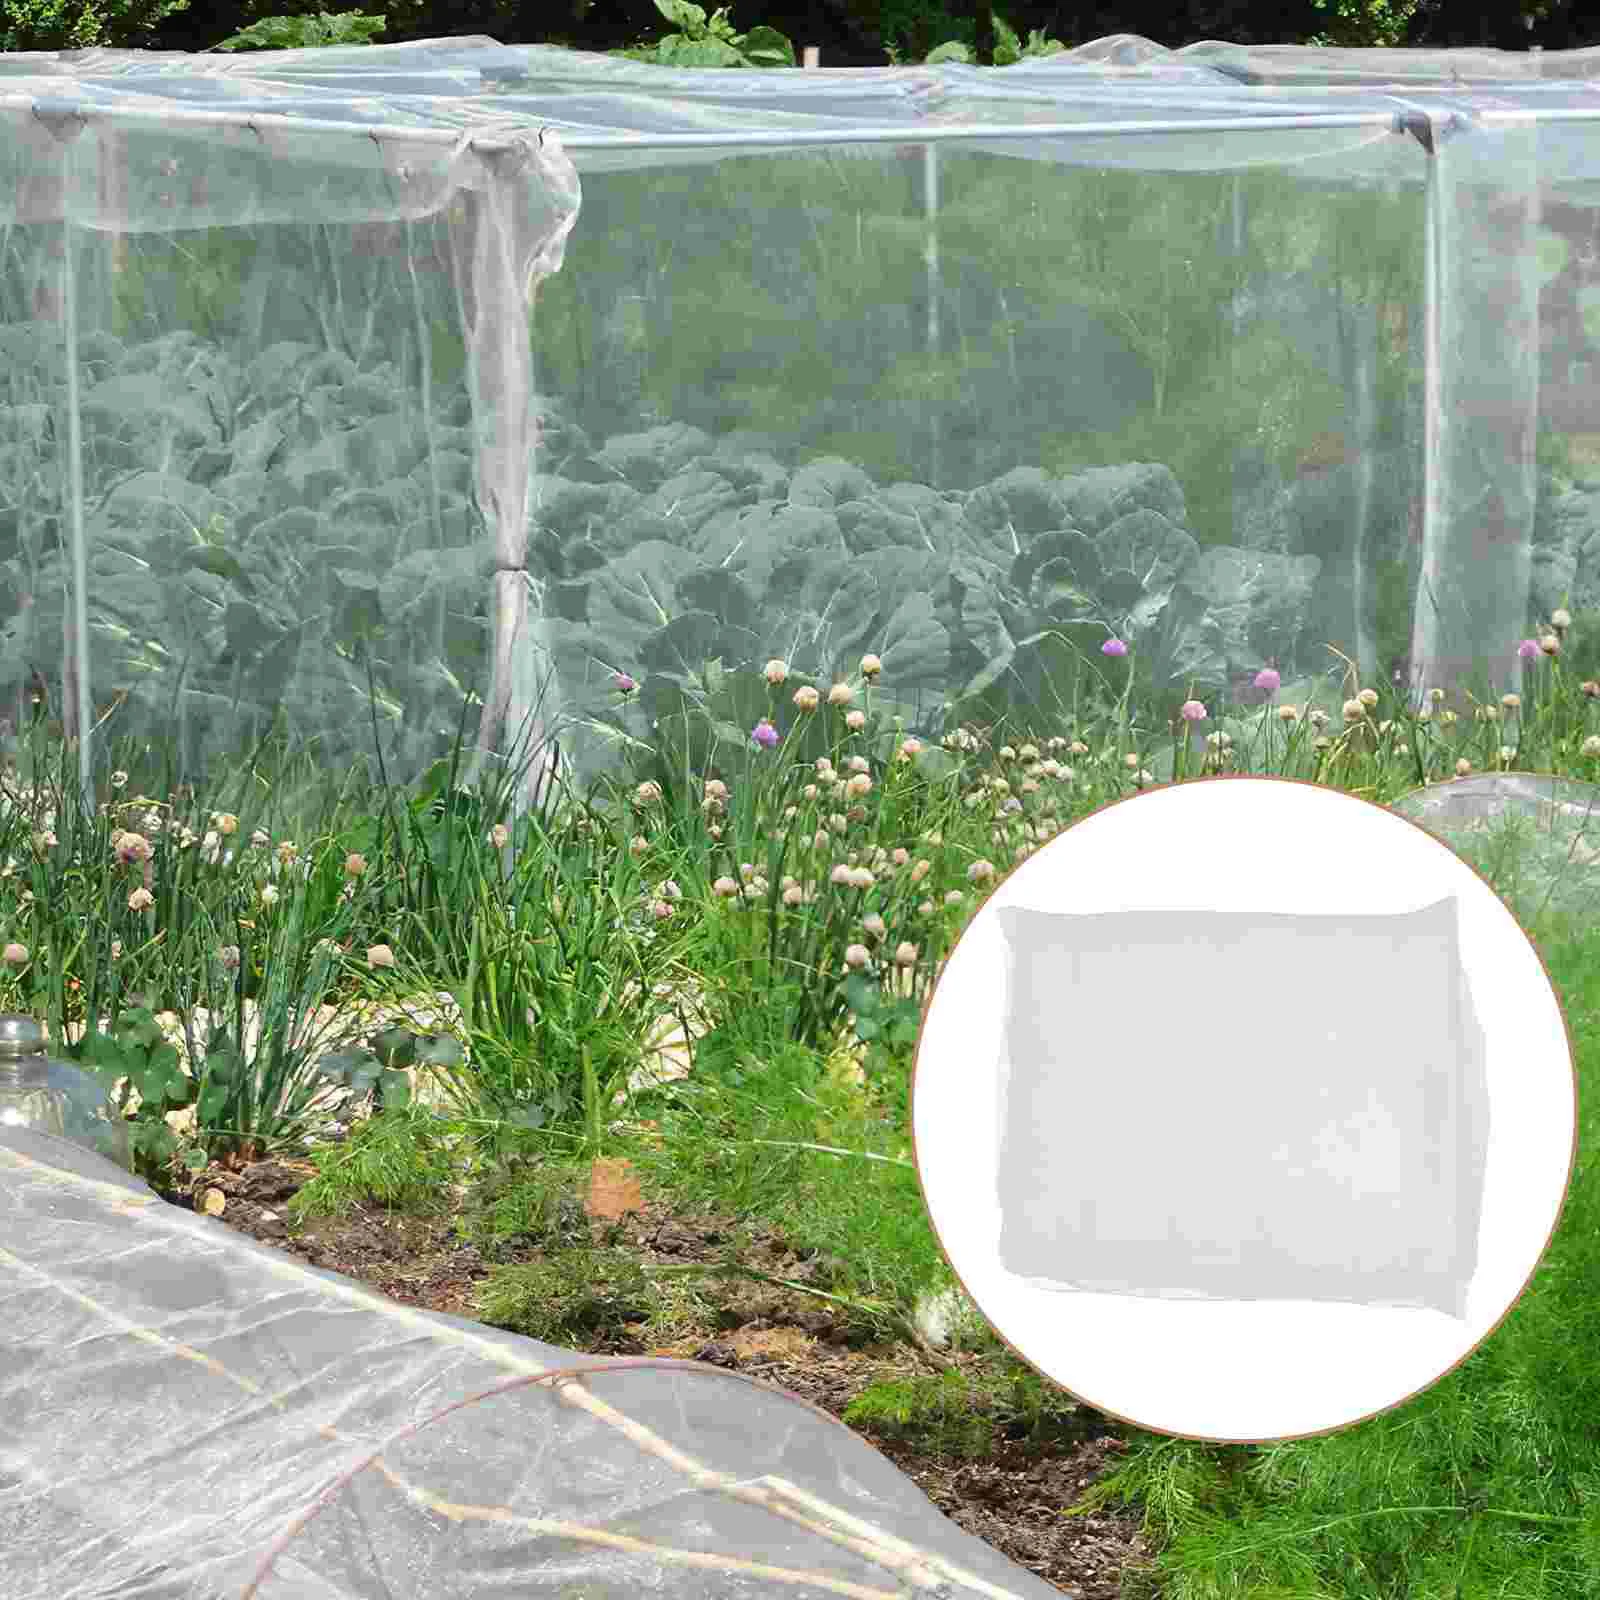 

1 Roll of Mesh Anti Bird Net Cuttable Garden Insect Screen Vegetable Pests Netting Screen